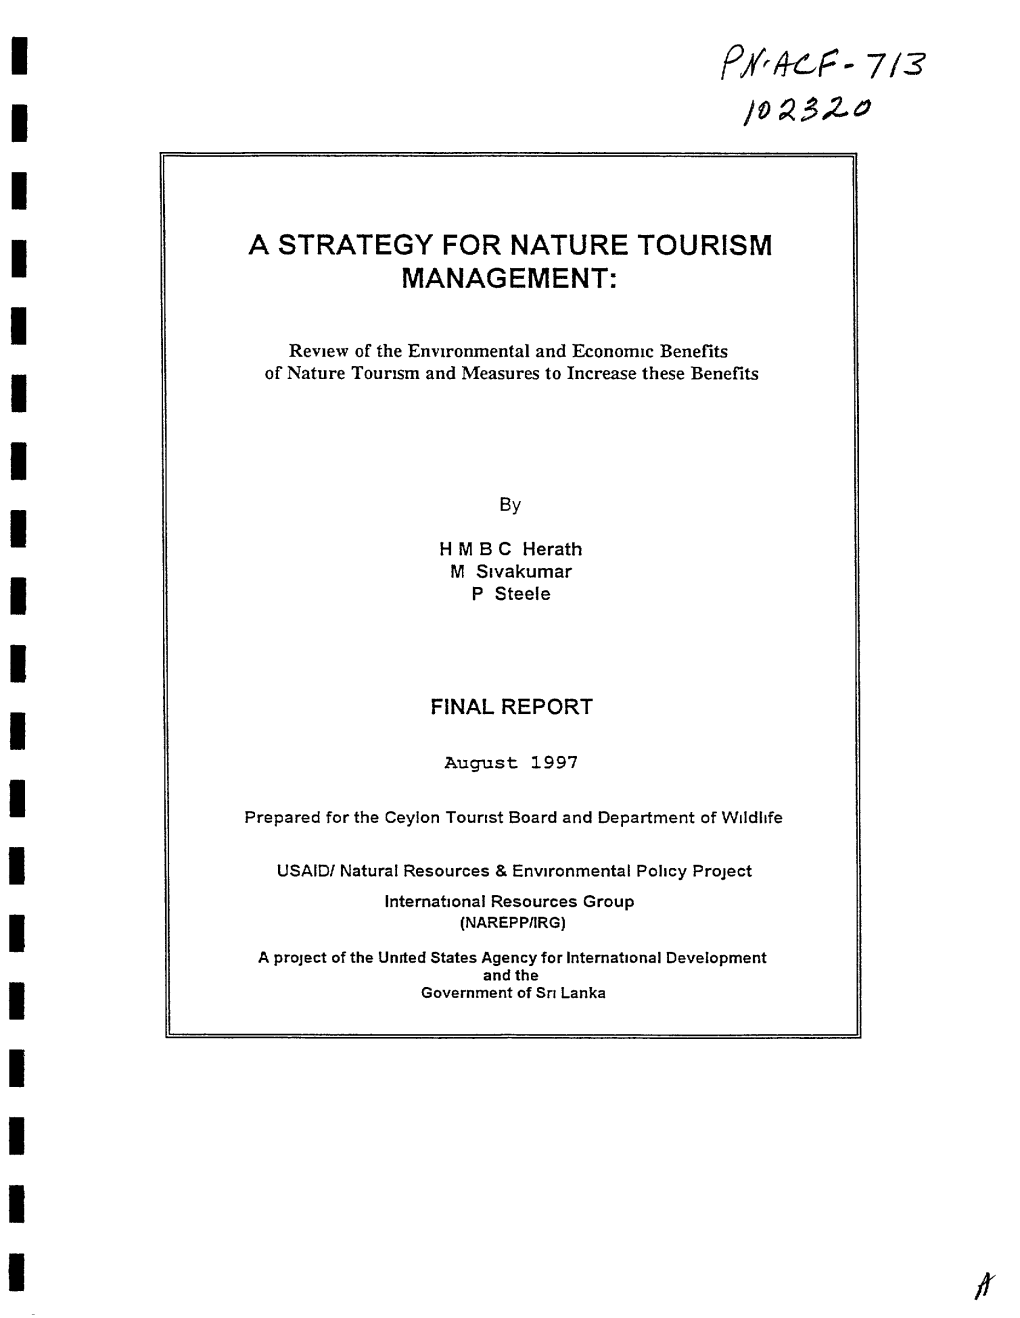 A Strategy for Nature Tourism Management